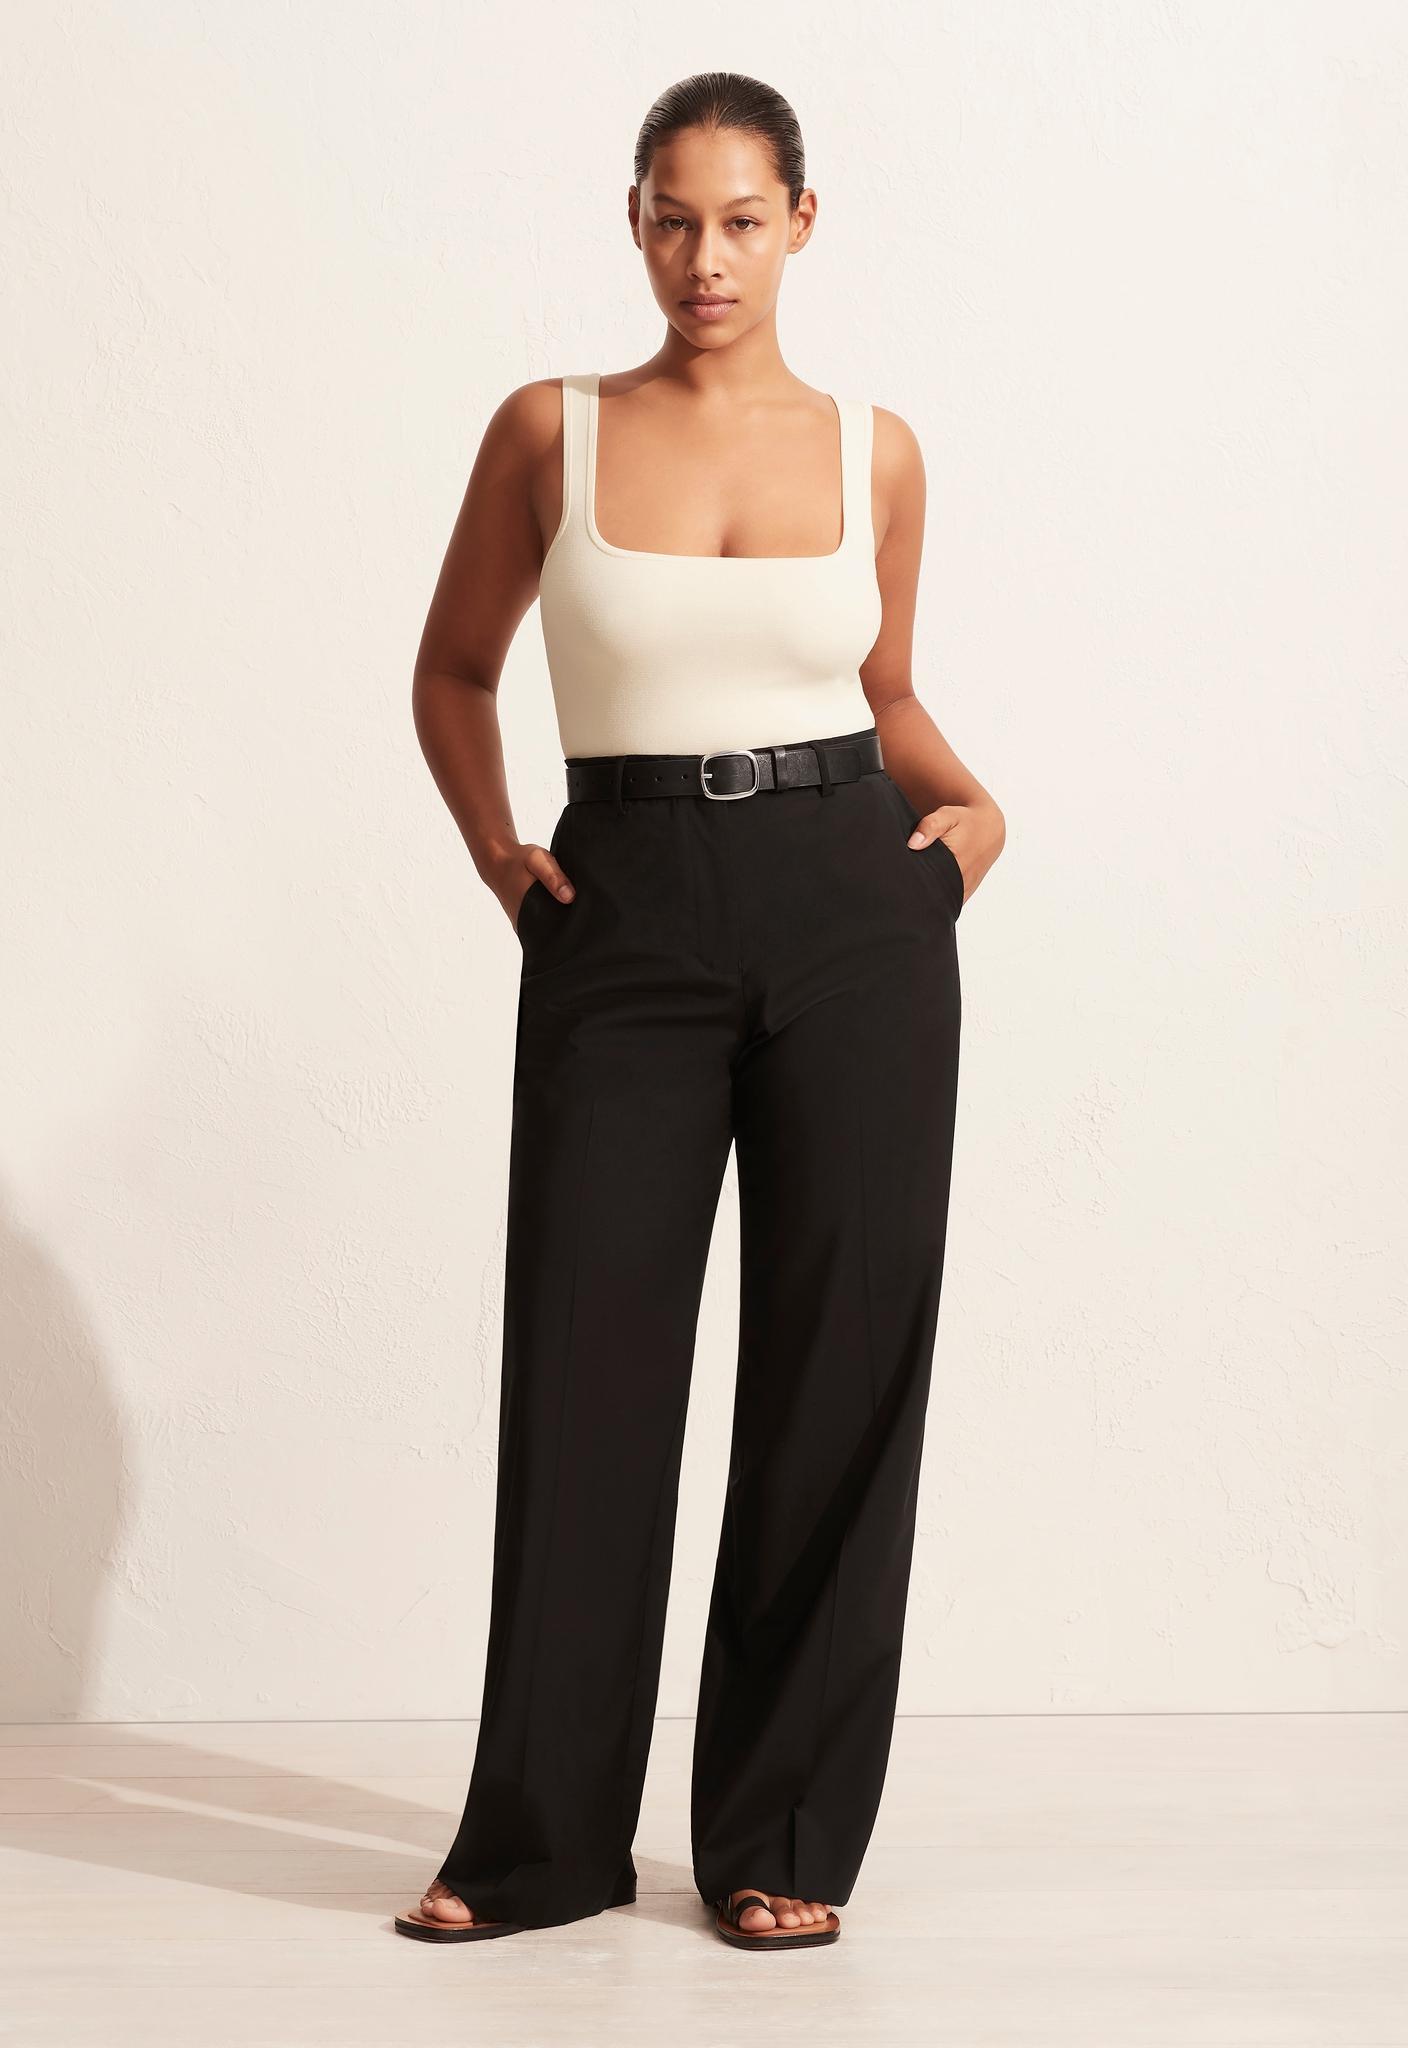 Relaxed Tailored Trouser Black - Matteau